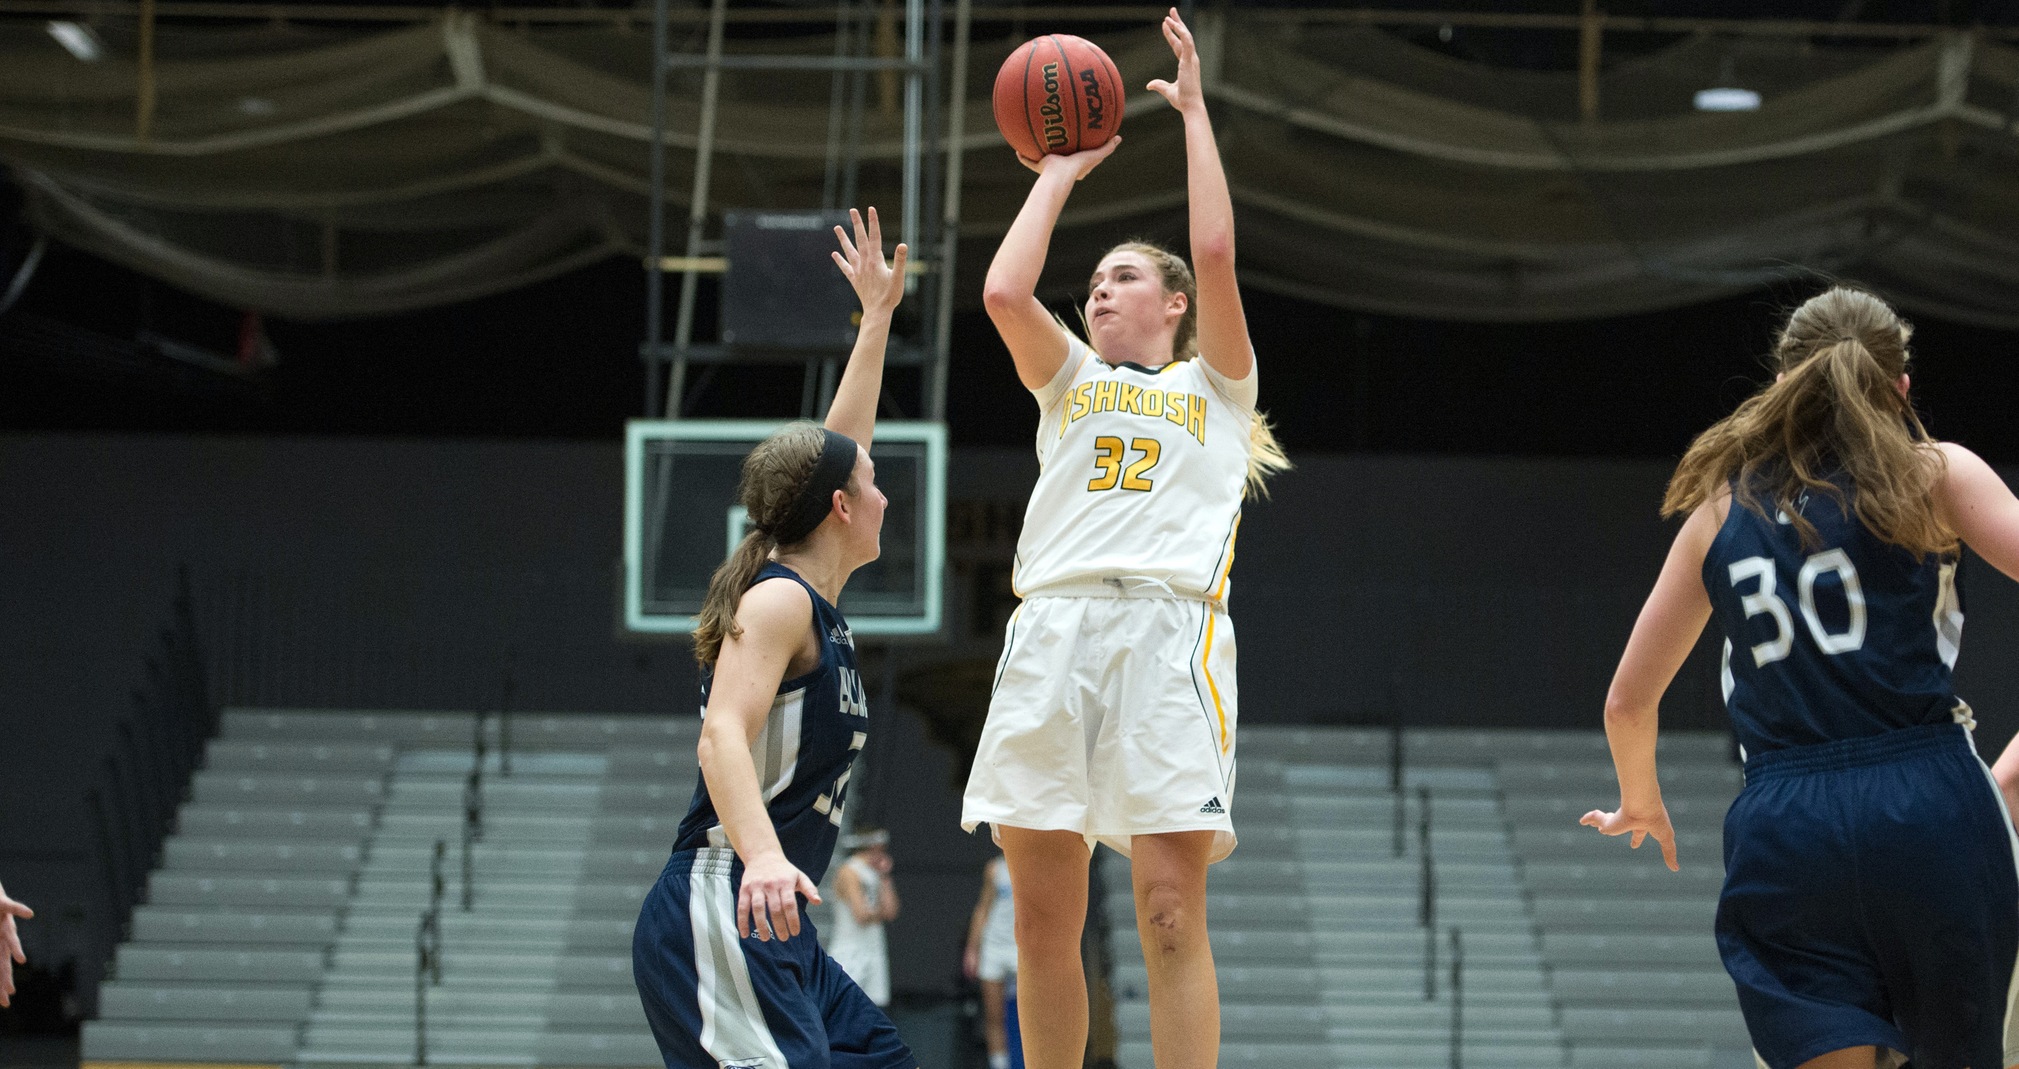 Madeline Staples scored nine points against the Blue Devils by converting 4 of 6 shots from the field and 1 of 2 free throws.